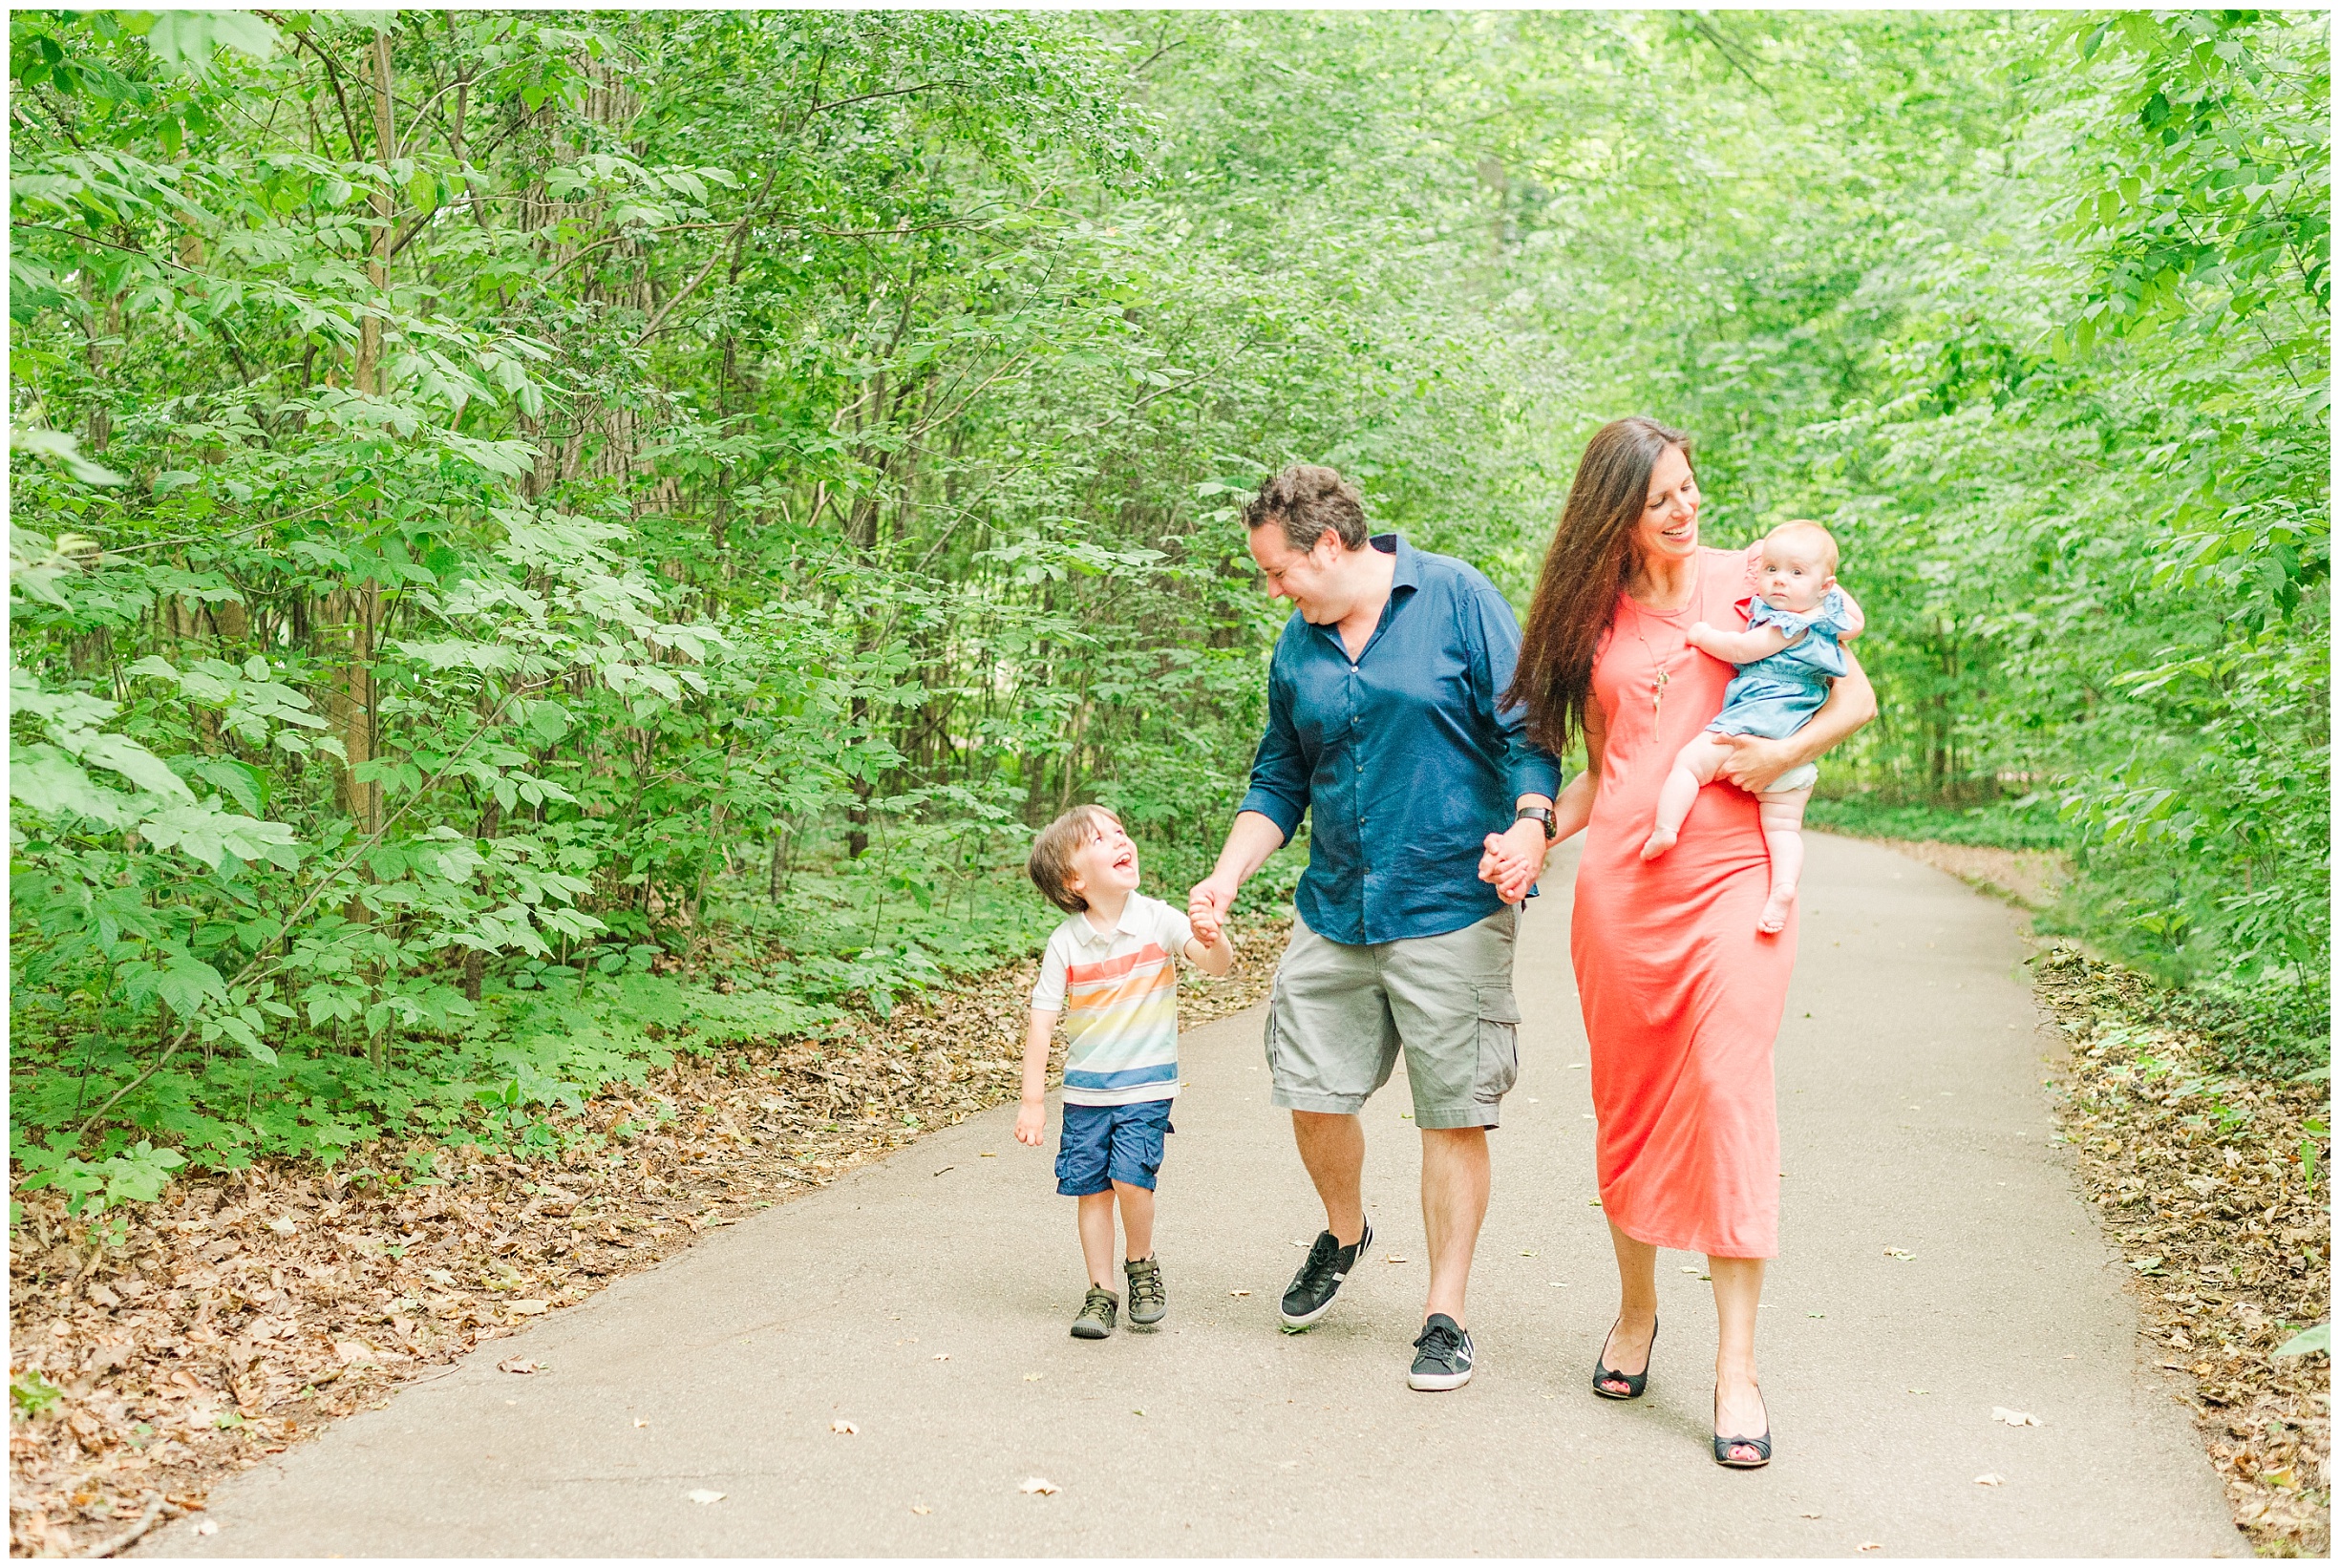 A family of four walks down a paved path surrounded by trees. A little boy is holding his dad's hand and looking up at him, dad is looking down at his son. Mom is holding their daughter on her hip and smiling while looking at her.